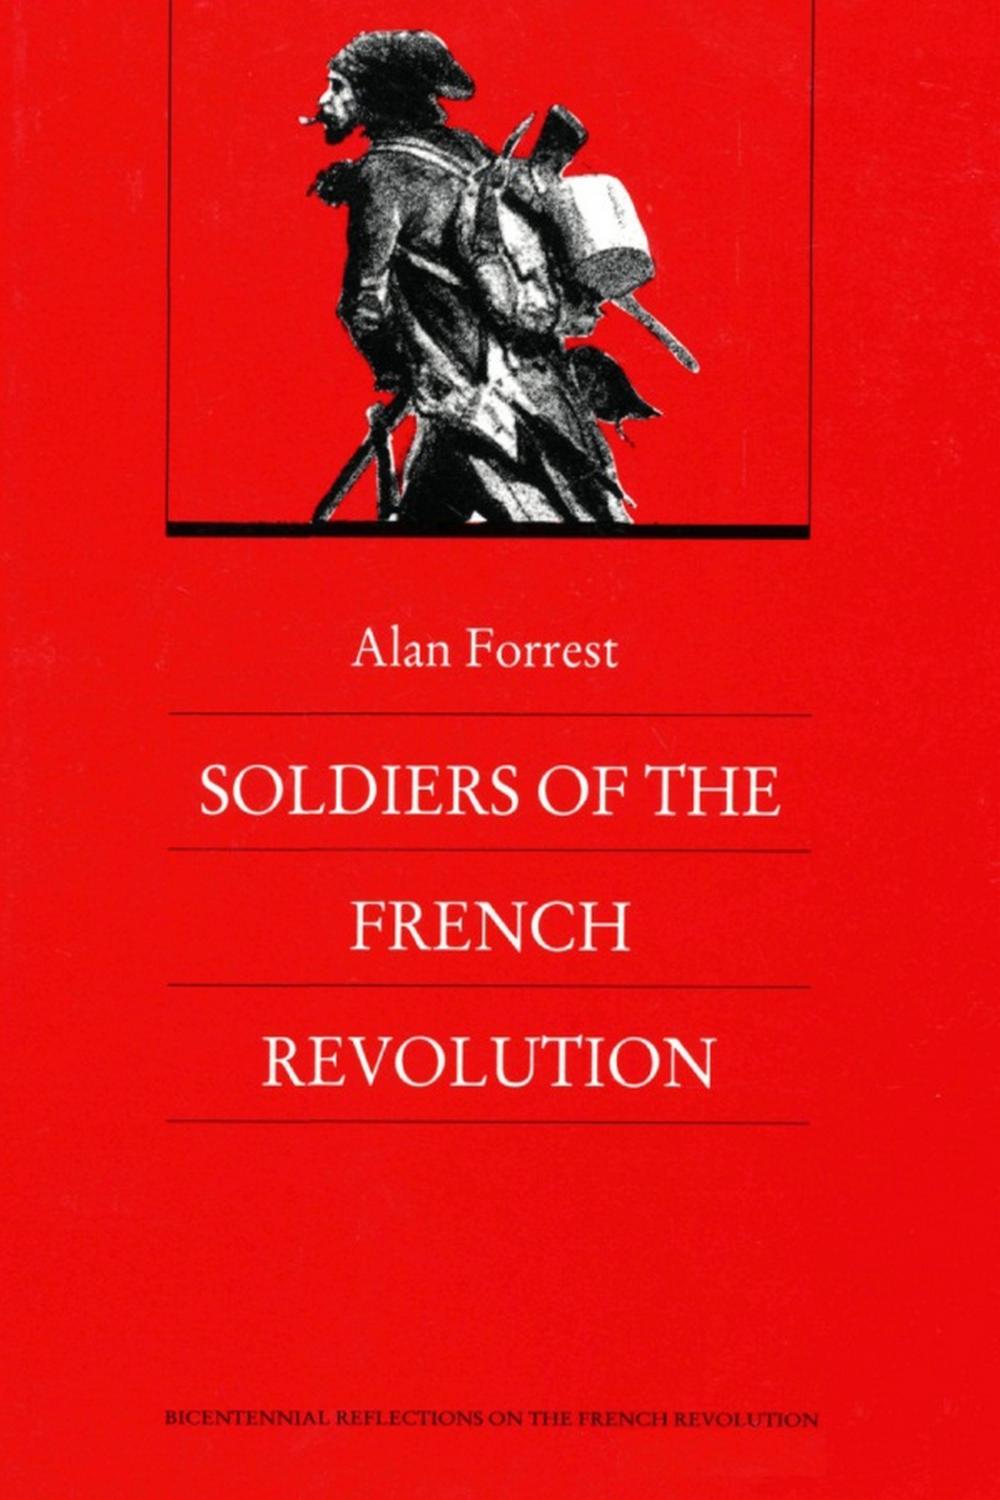 Soldiers of the French Revolution - Alan Forrest